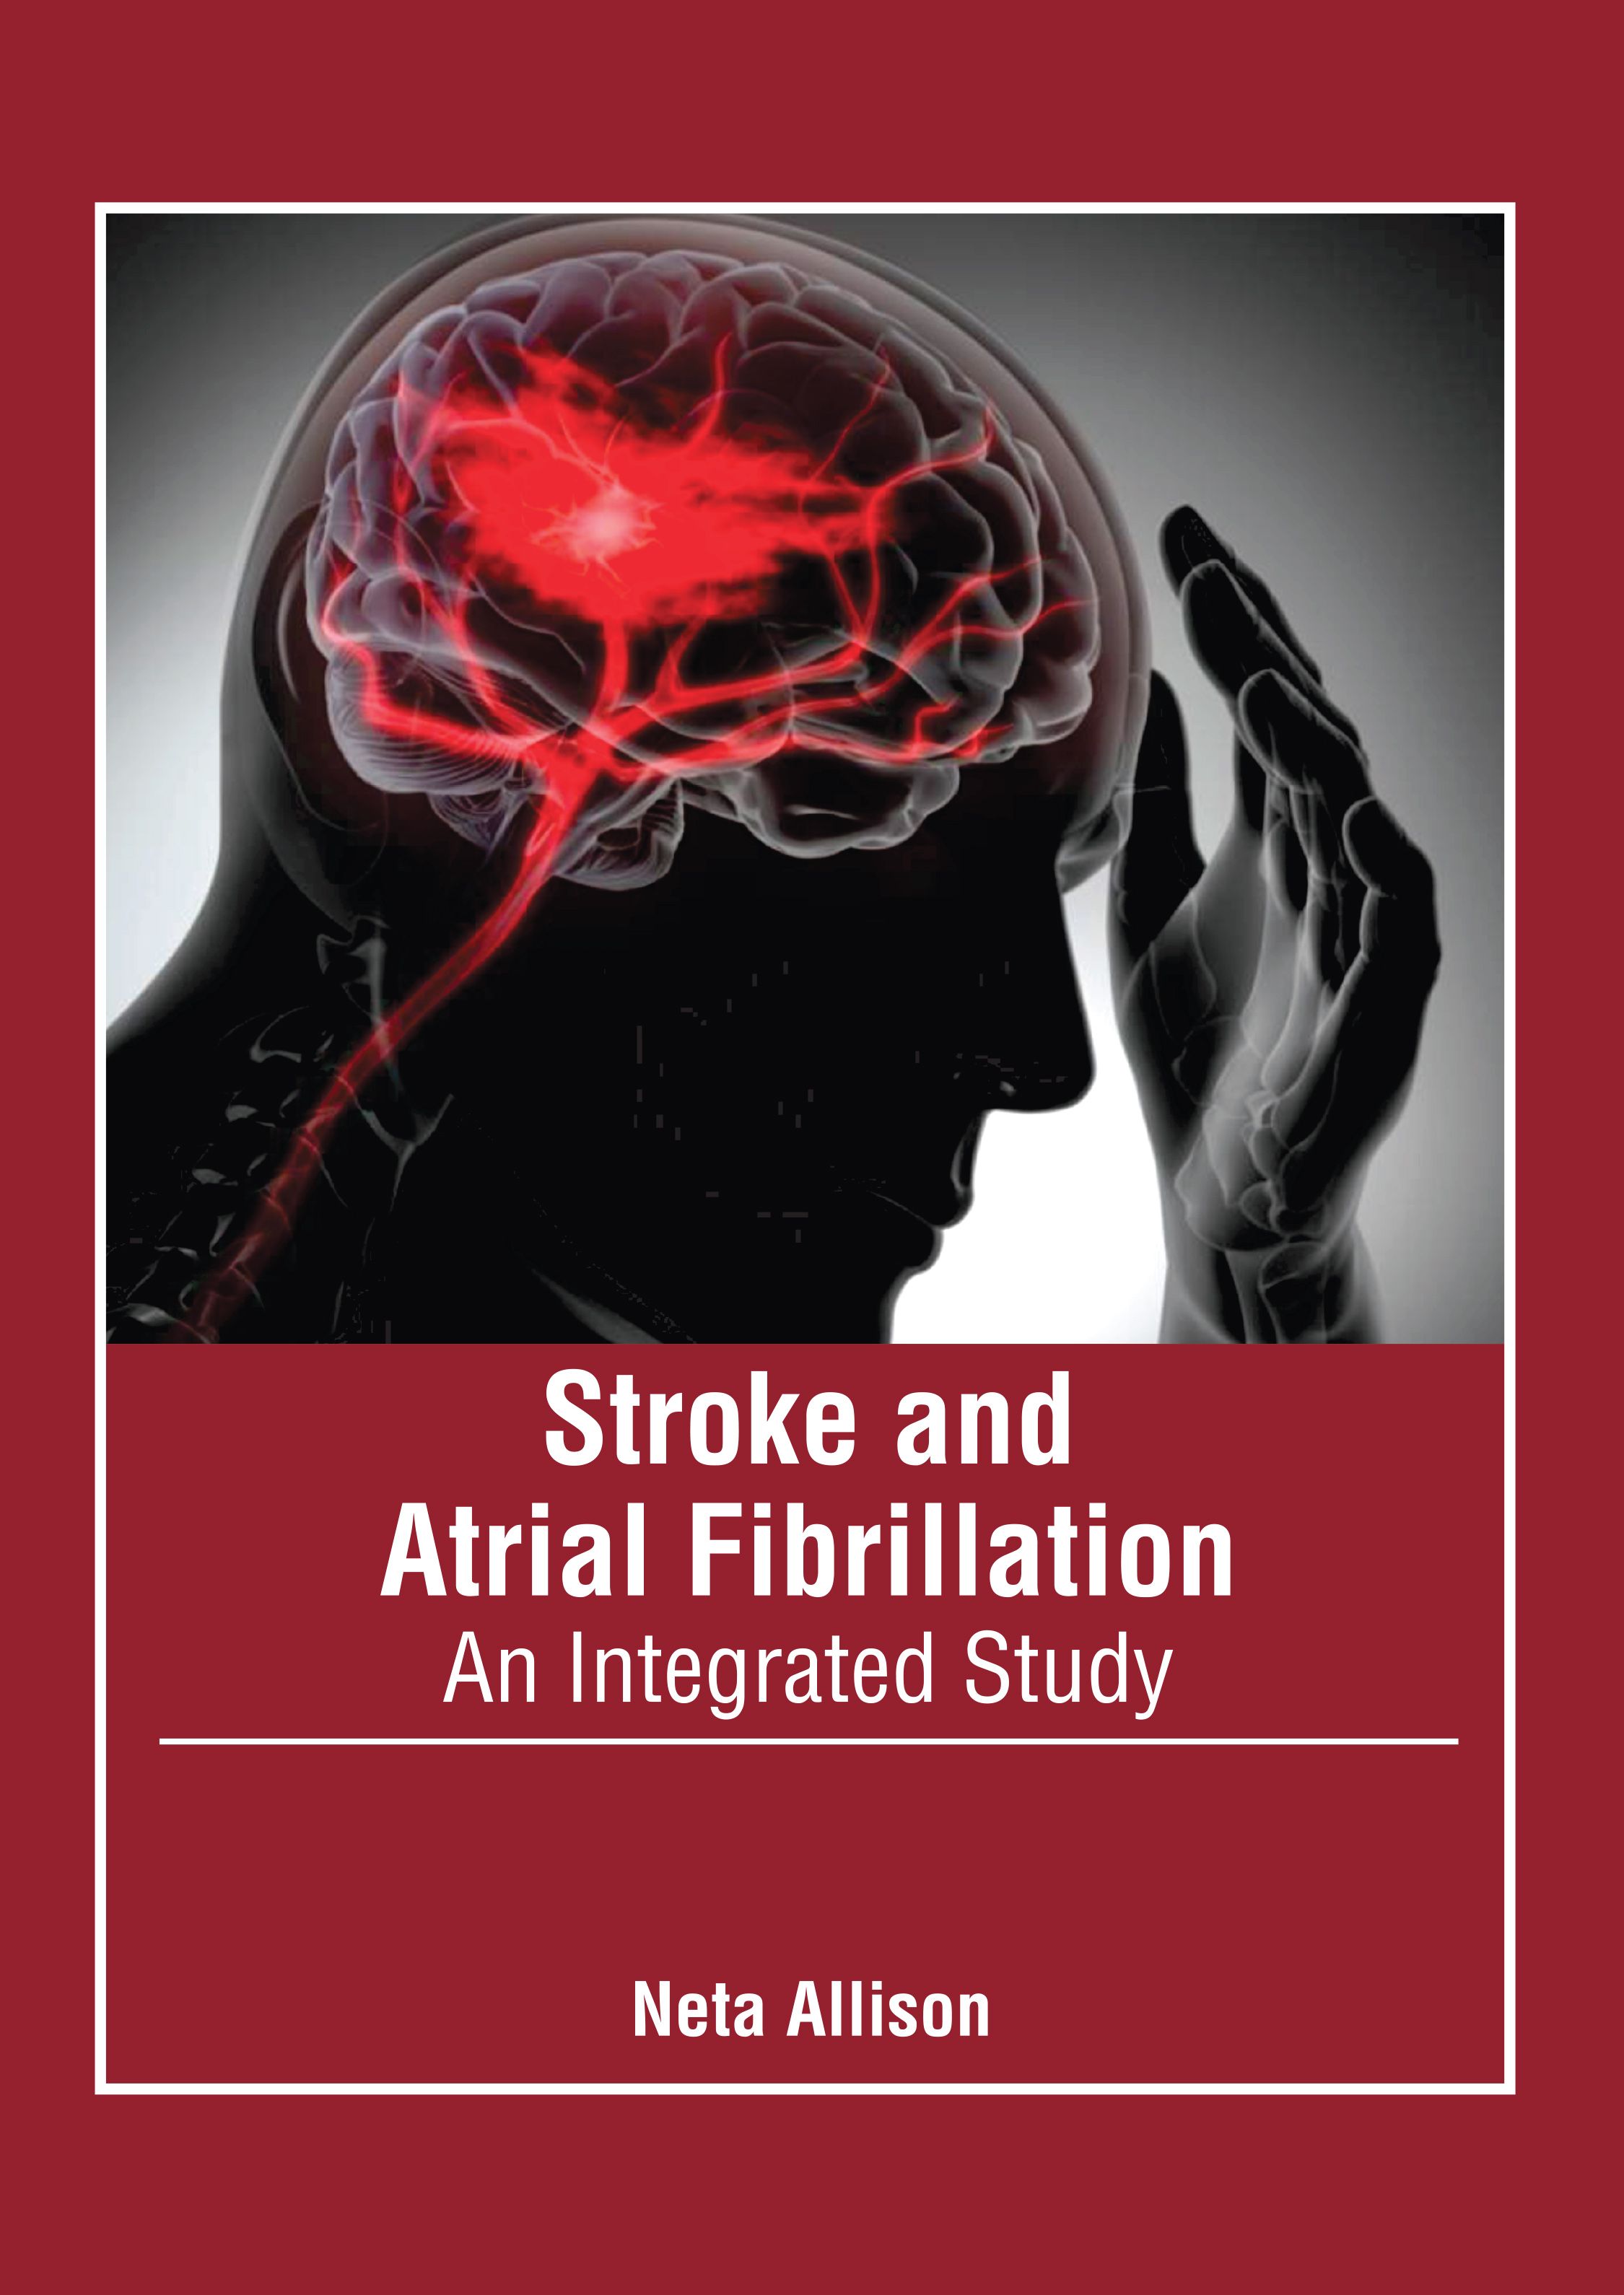 STROKE AND ATRIAL FIBRILLATION: AN INTEGRATED STUDY